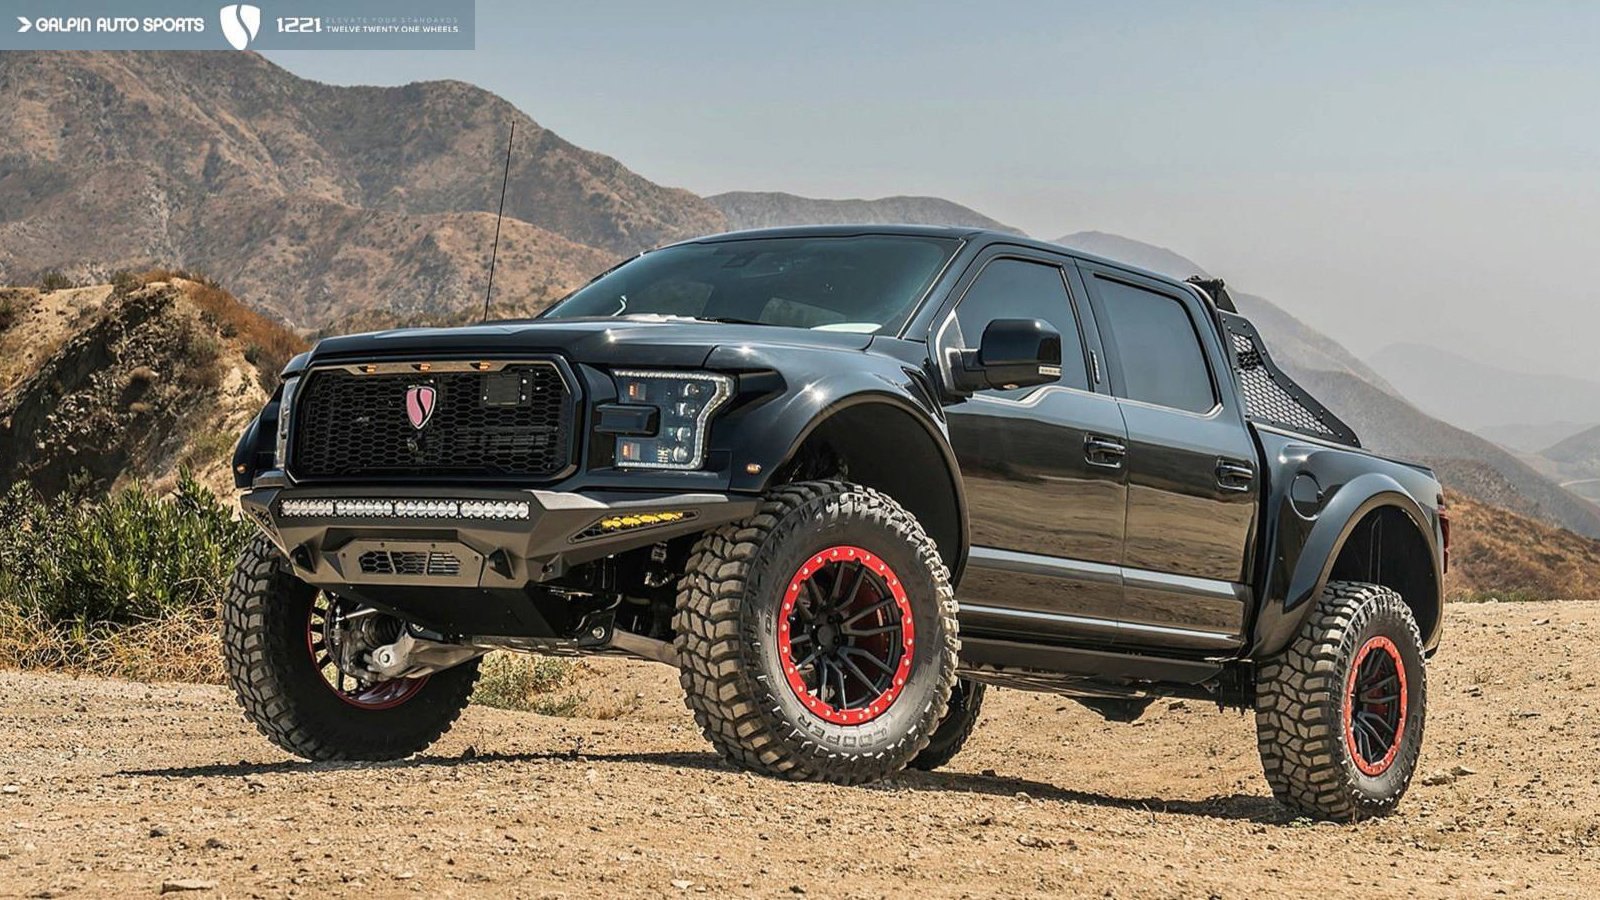 Custom Black Lifted Ford F-150 on Cooper Tires - Photo by Galpin Auto Sports